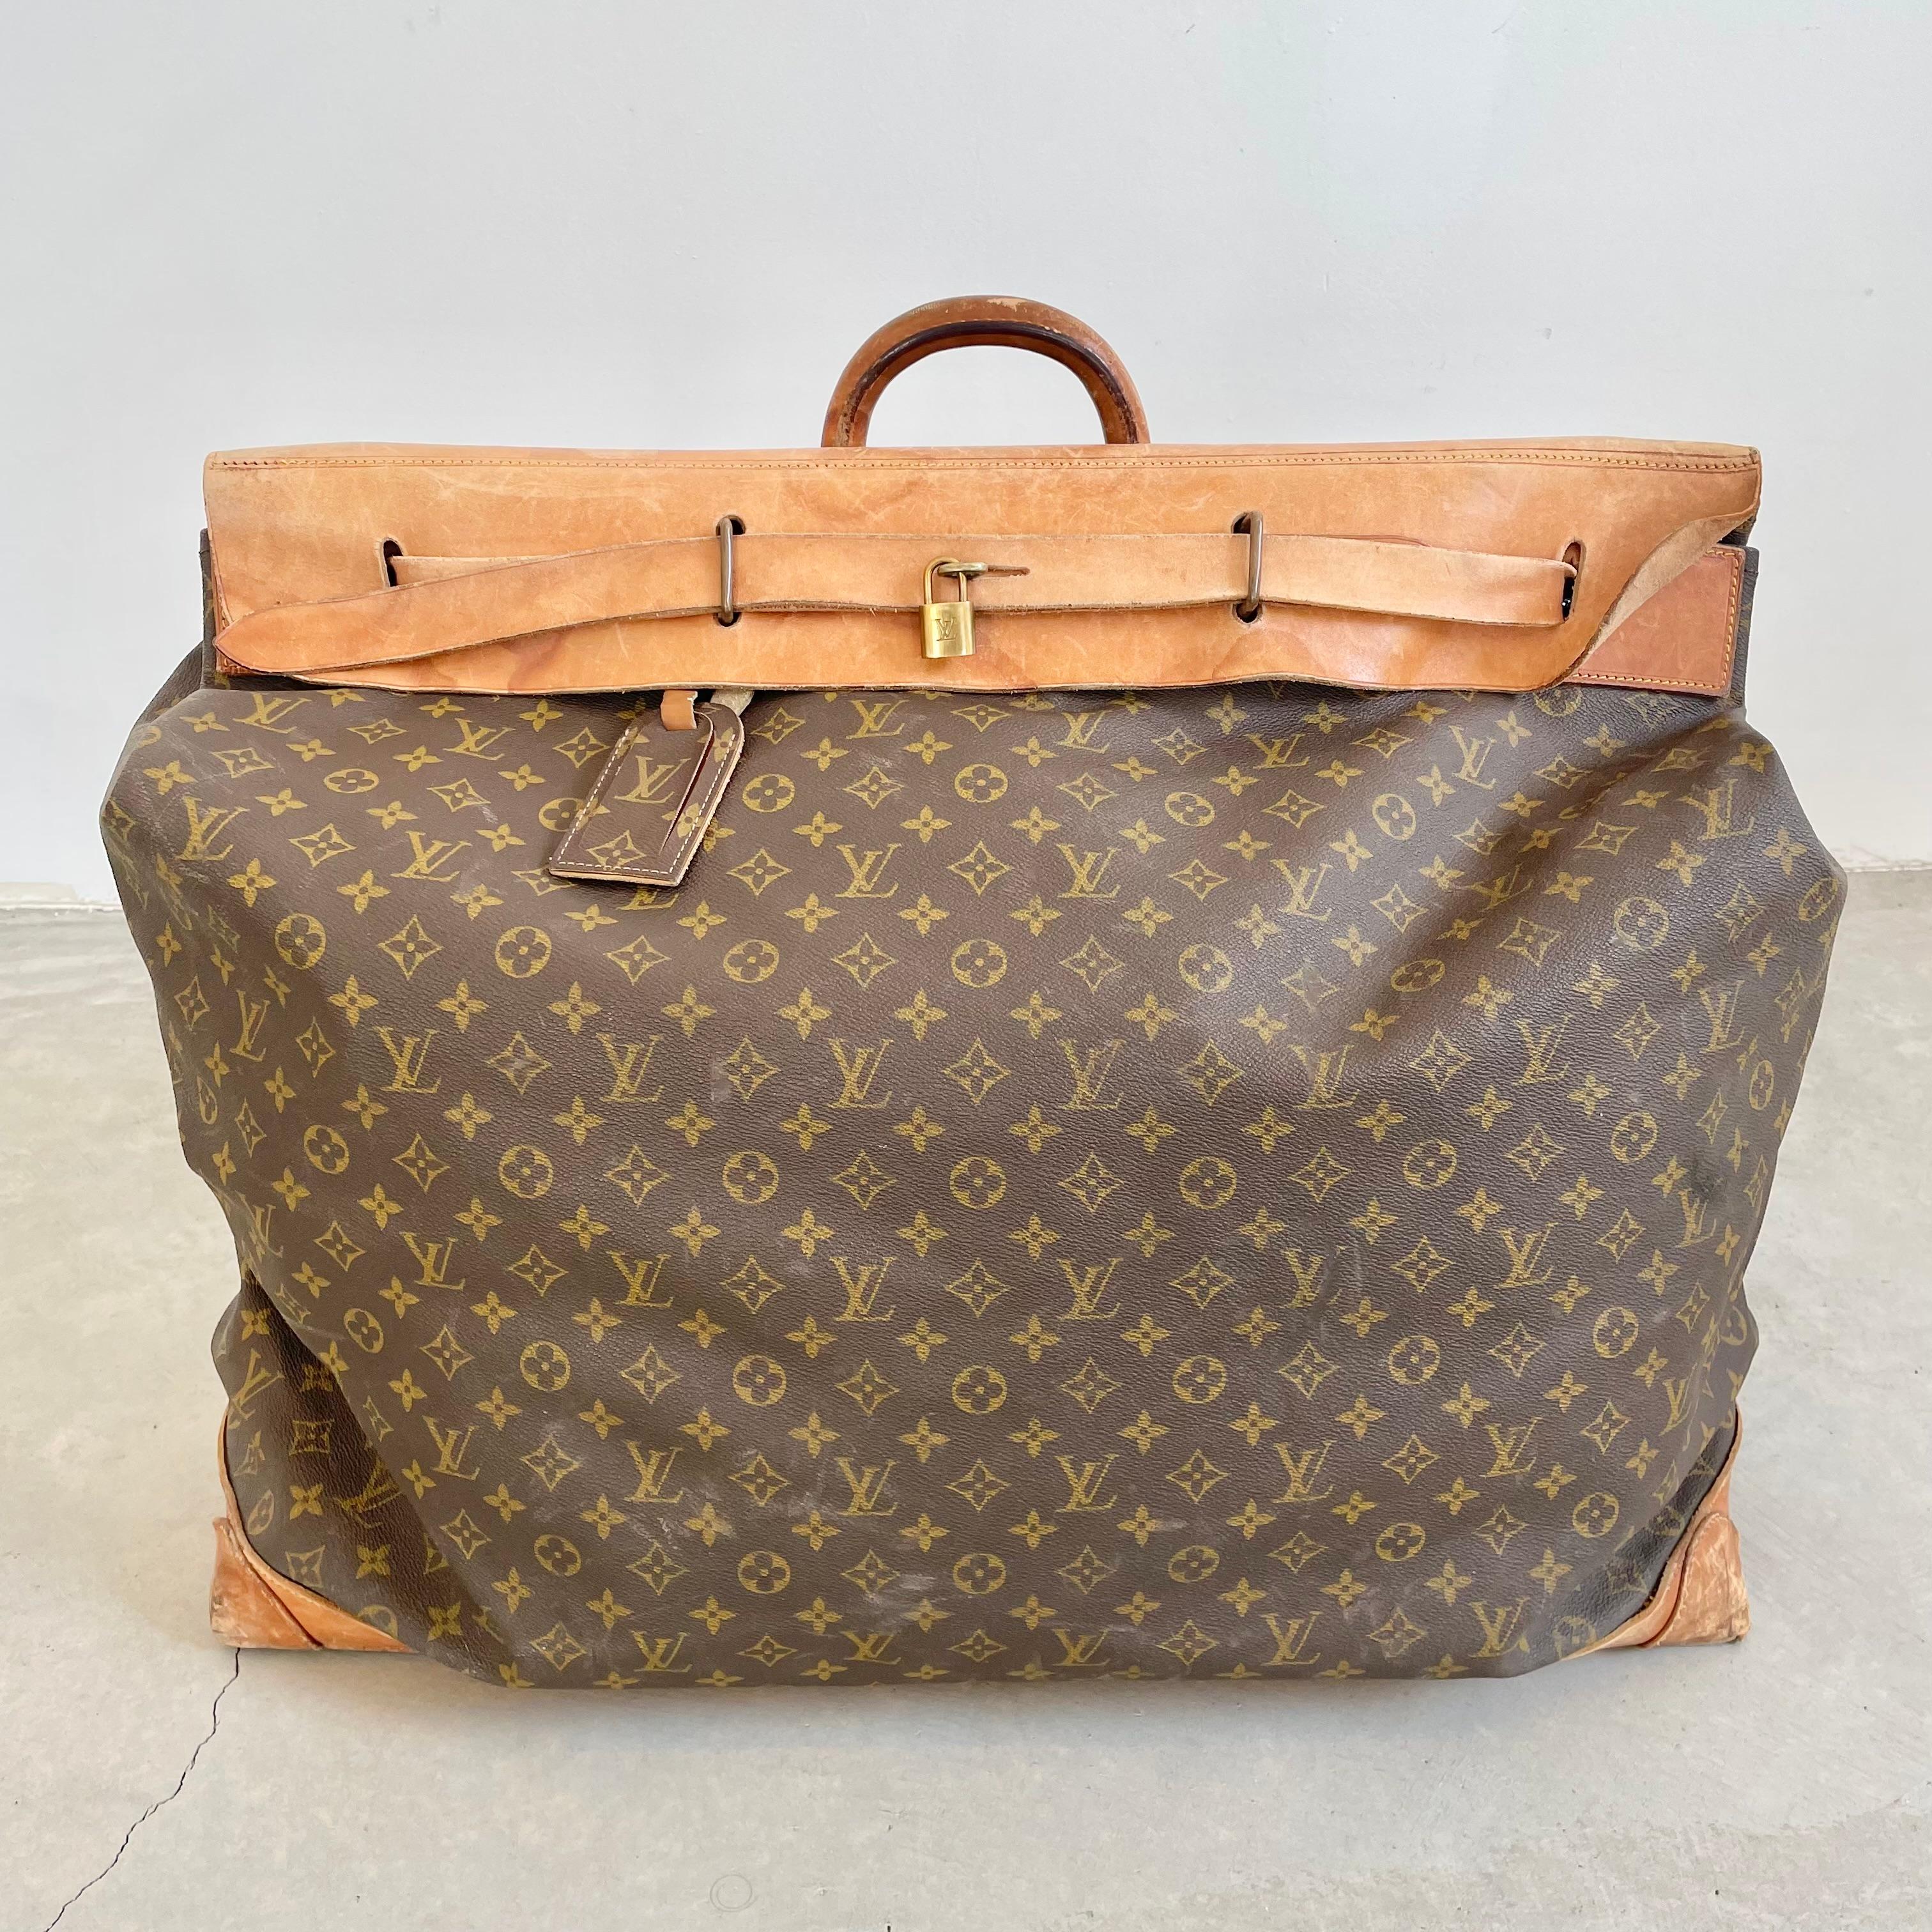 Classic vintage Louis Vuitton steamer bag. Large, oversized bag, perfect for weekend trips. LV monogram print with saddle leather and brass hardware. Timeless simplicity in design and iconic badging have made this a coveted bag for the last 75